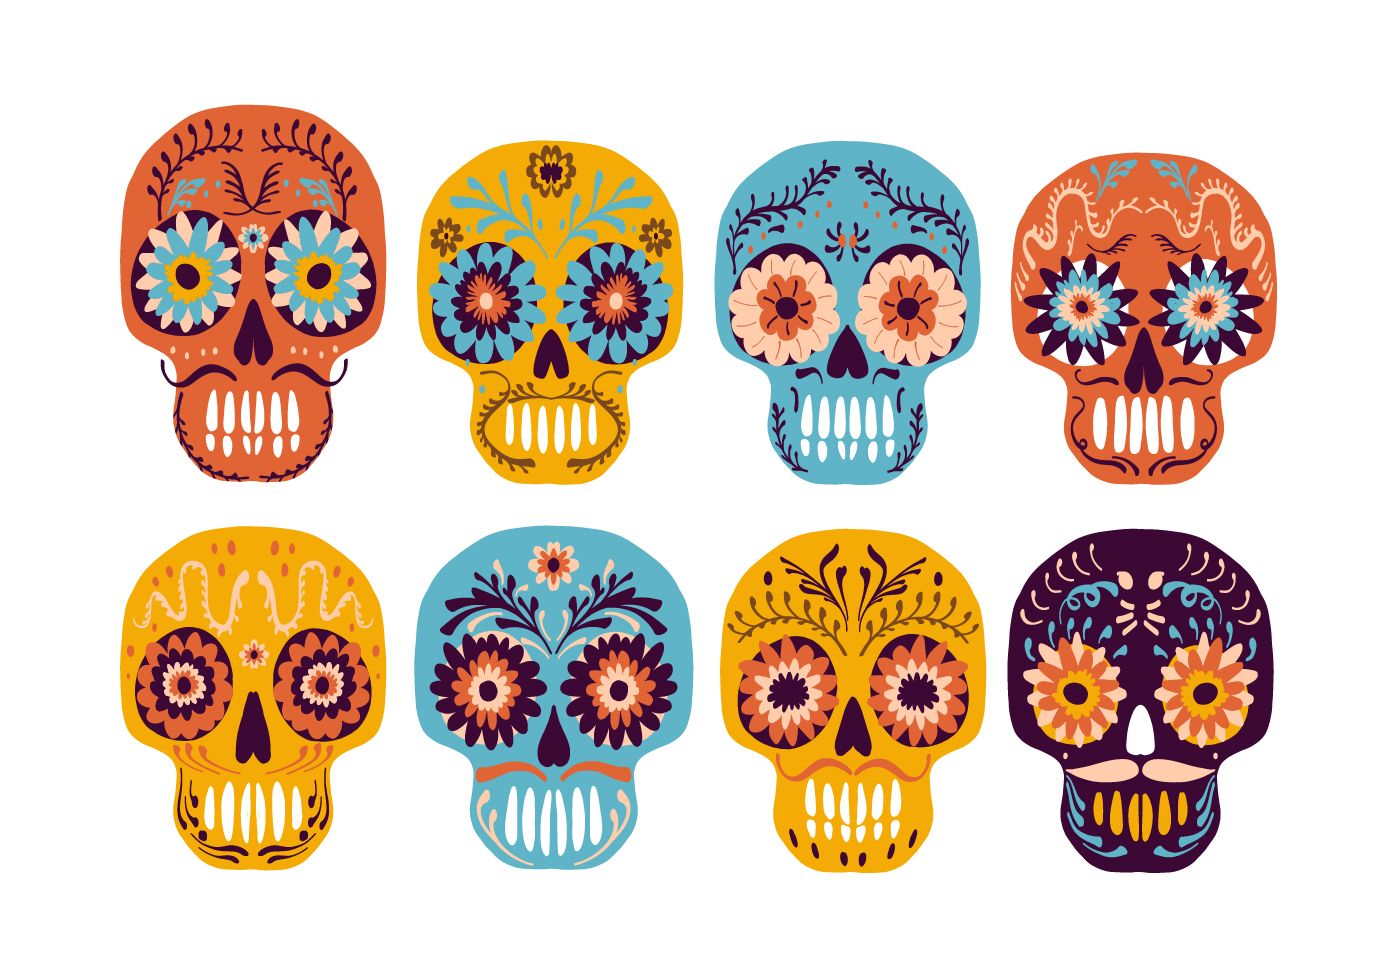 Download Day Of The Dead Free Vector Art - (16,491 Free Downloads)